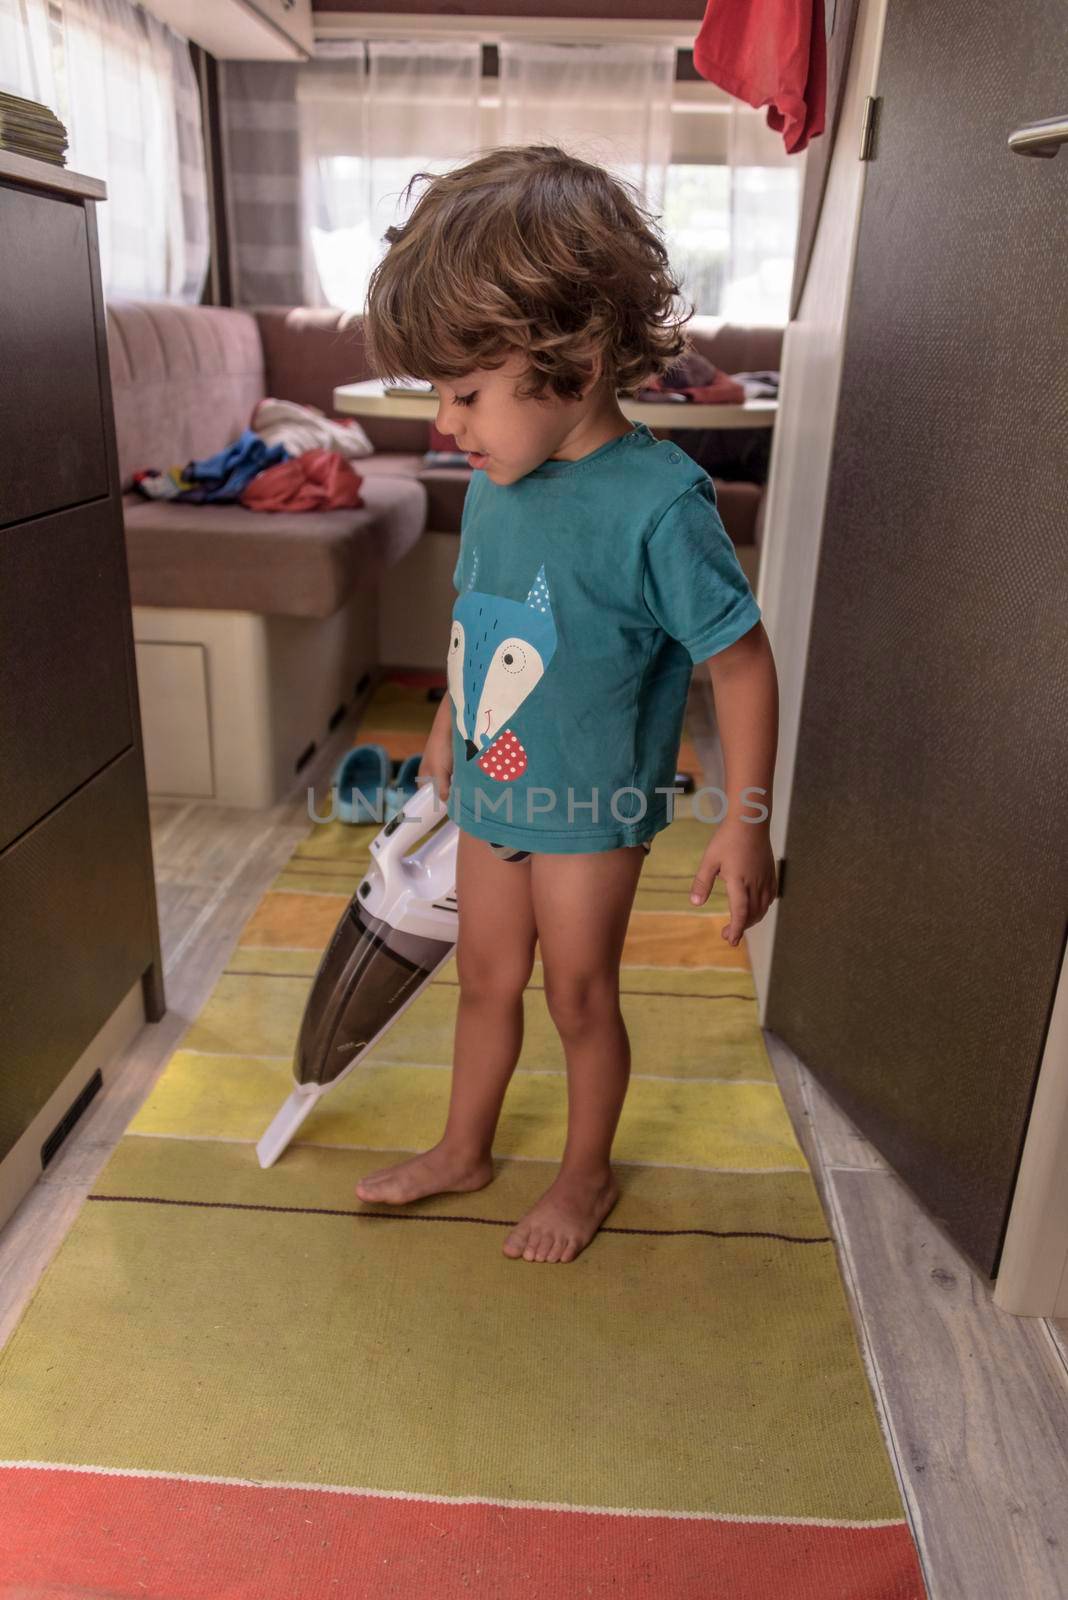 A sweet little boy vacuums the caravan while on vacation. A cute boy is cleaning the caravan